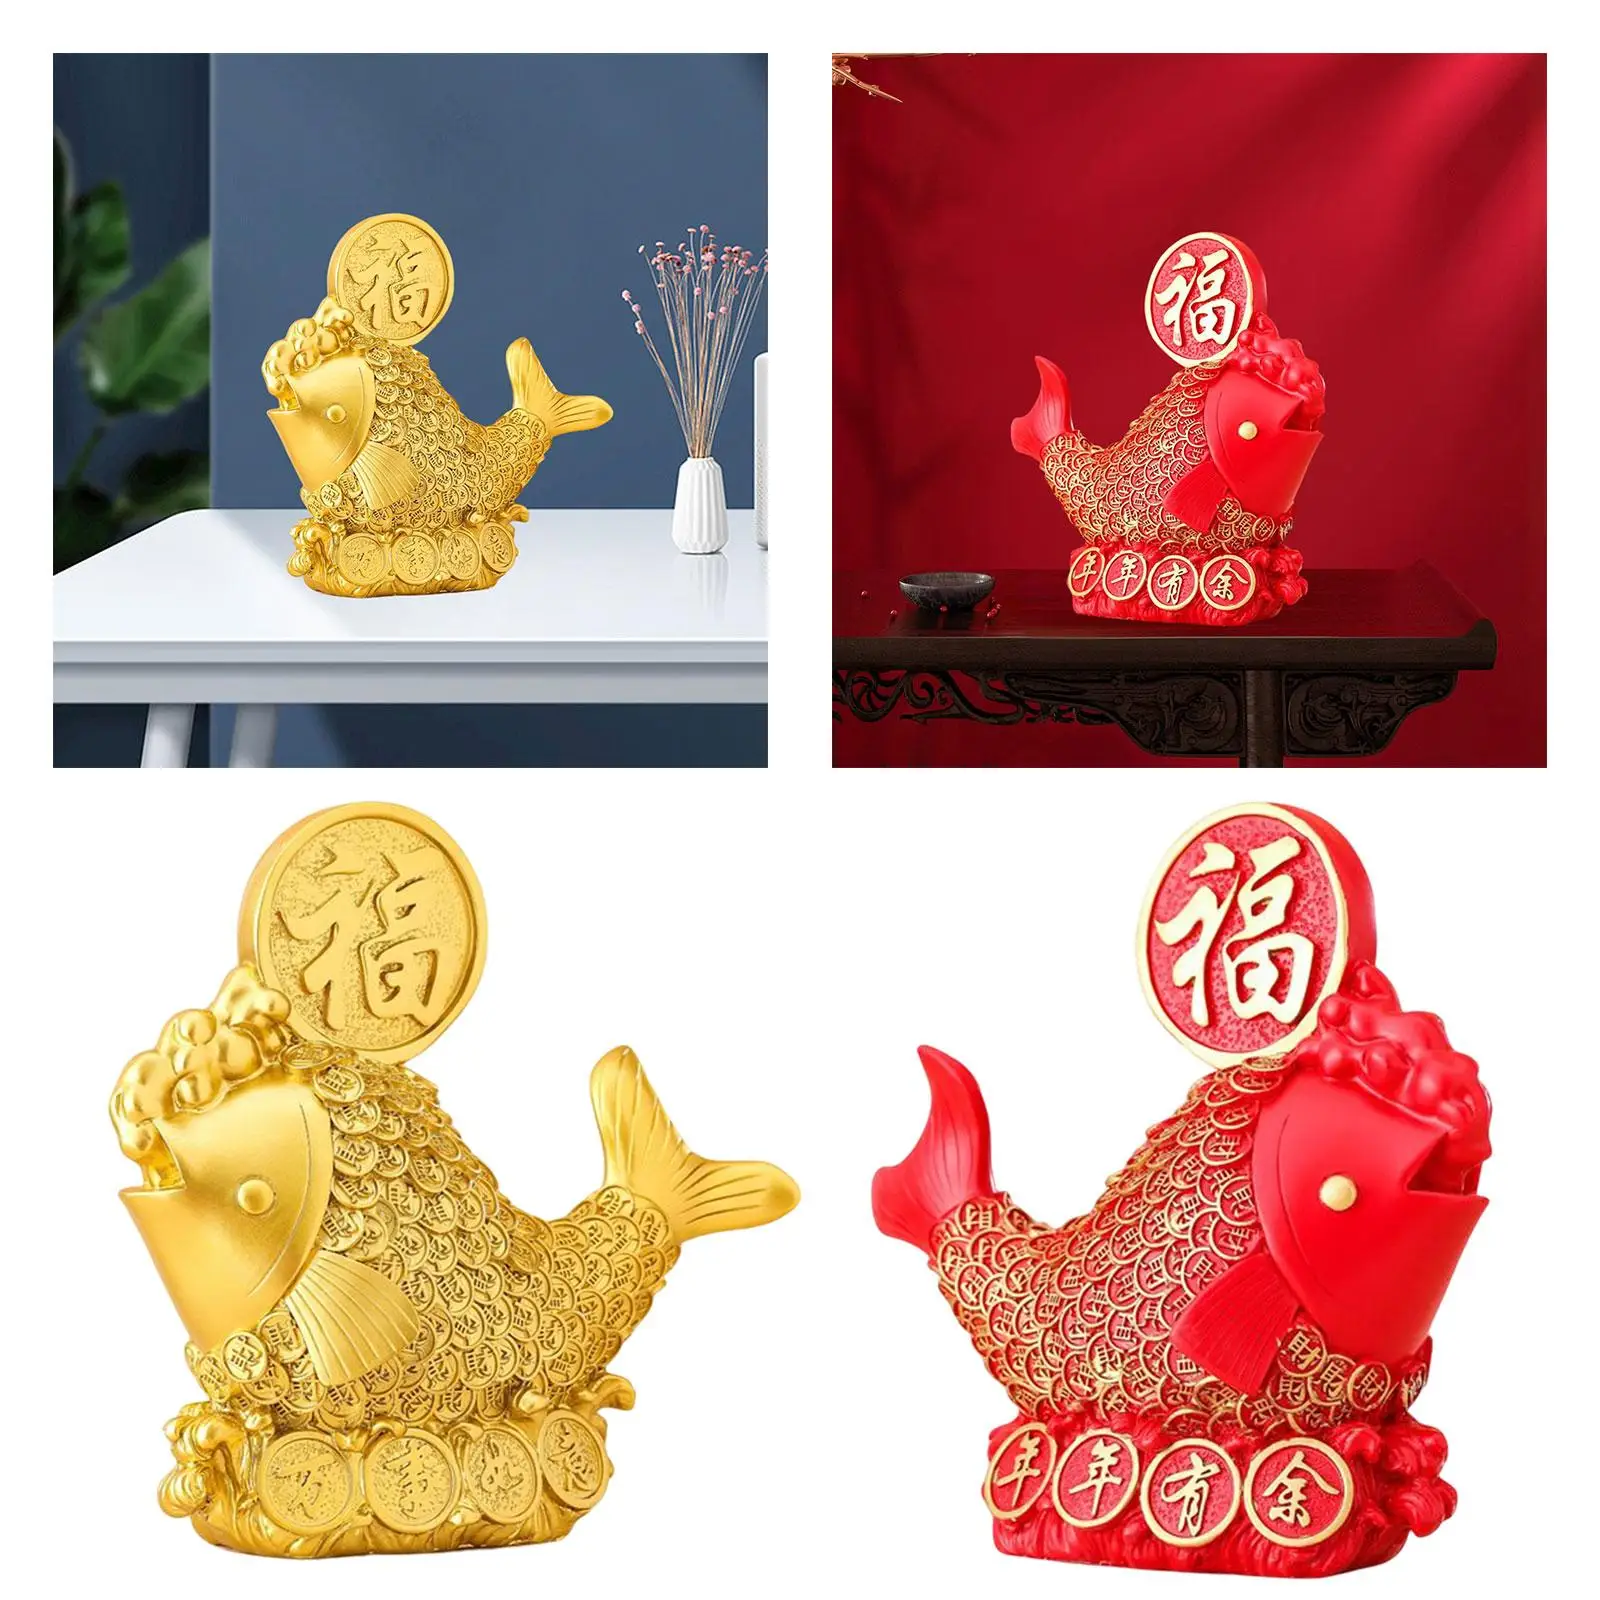 Resin Chinese Fish Statue Figurine Sculpture Collection Gift Crafts for Desktop Office Living Room Table Decoration